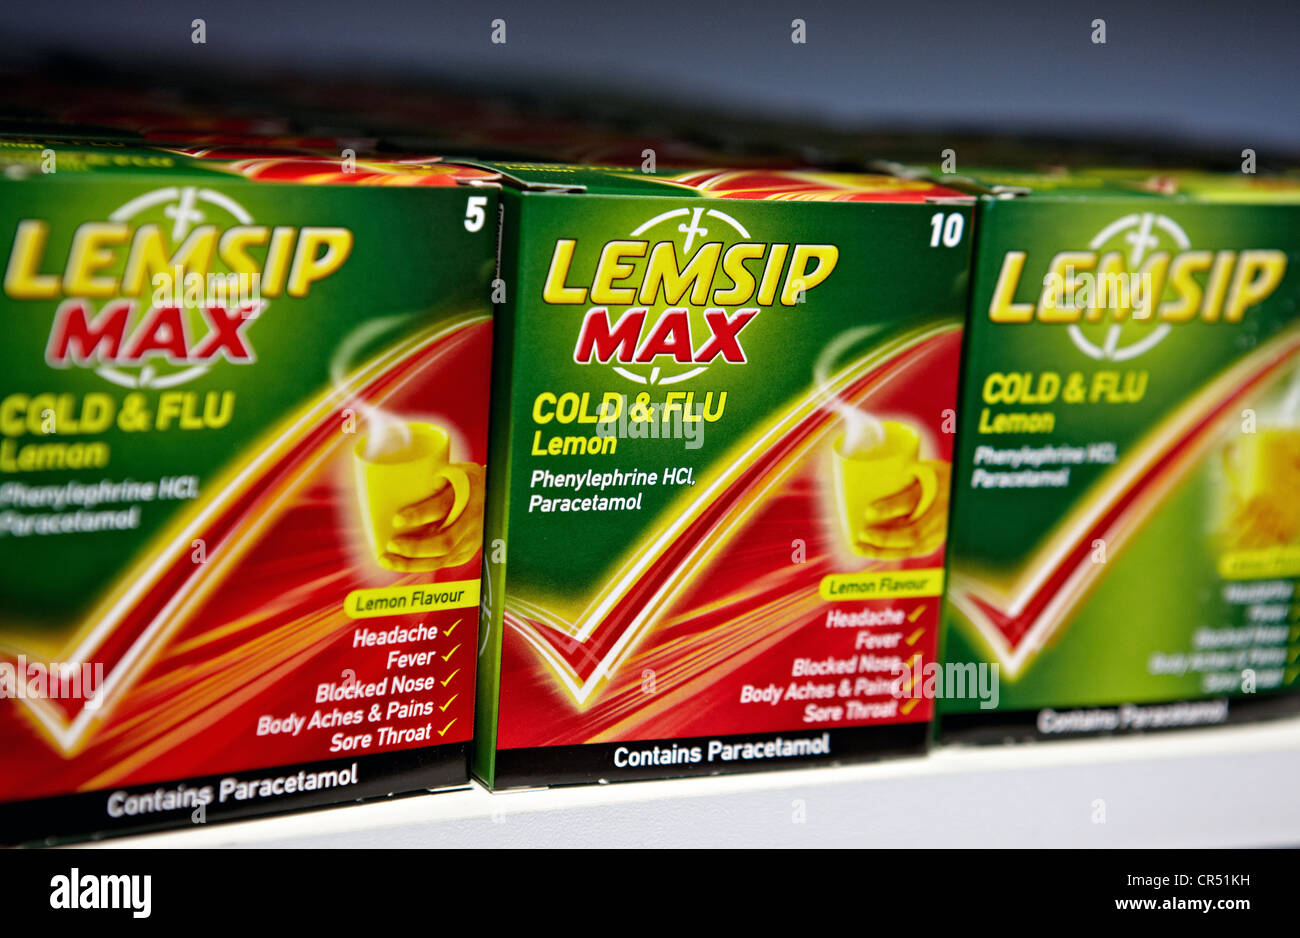 Lemsip Max cold and flu lemon pictured on a supermarket shelf. Lemsip provides relief from the symptons of flu and colds. Stock Photo